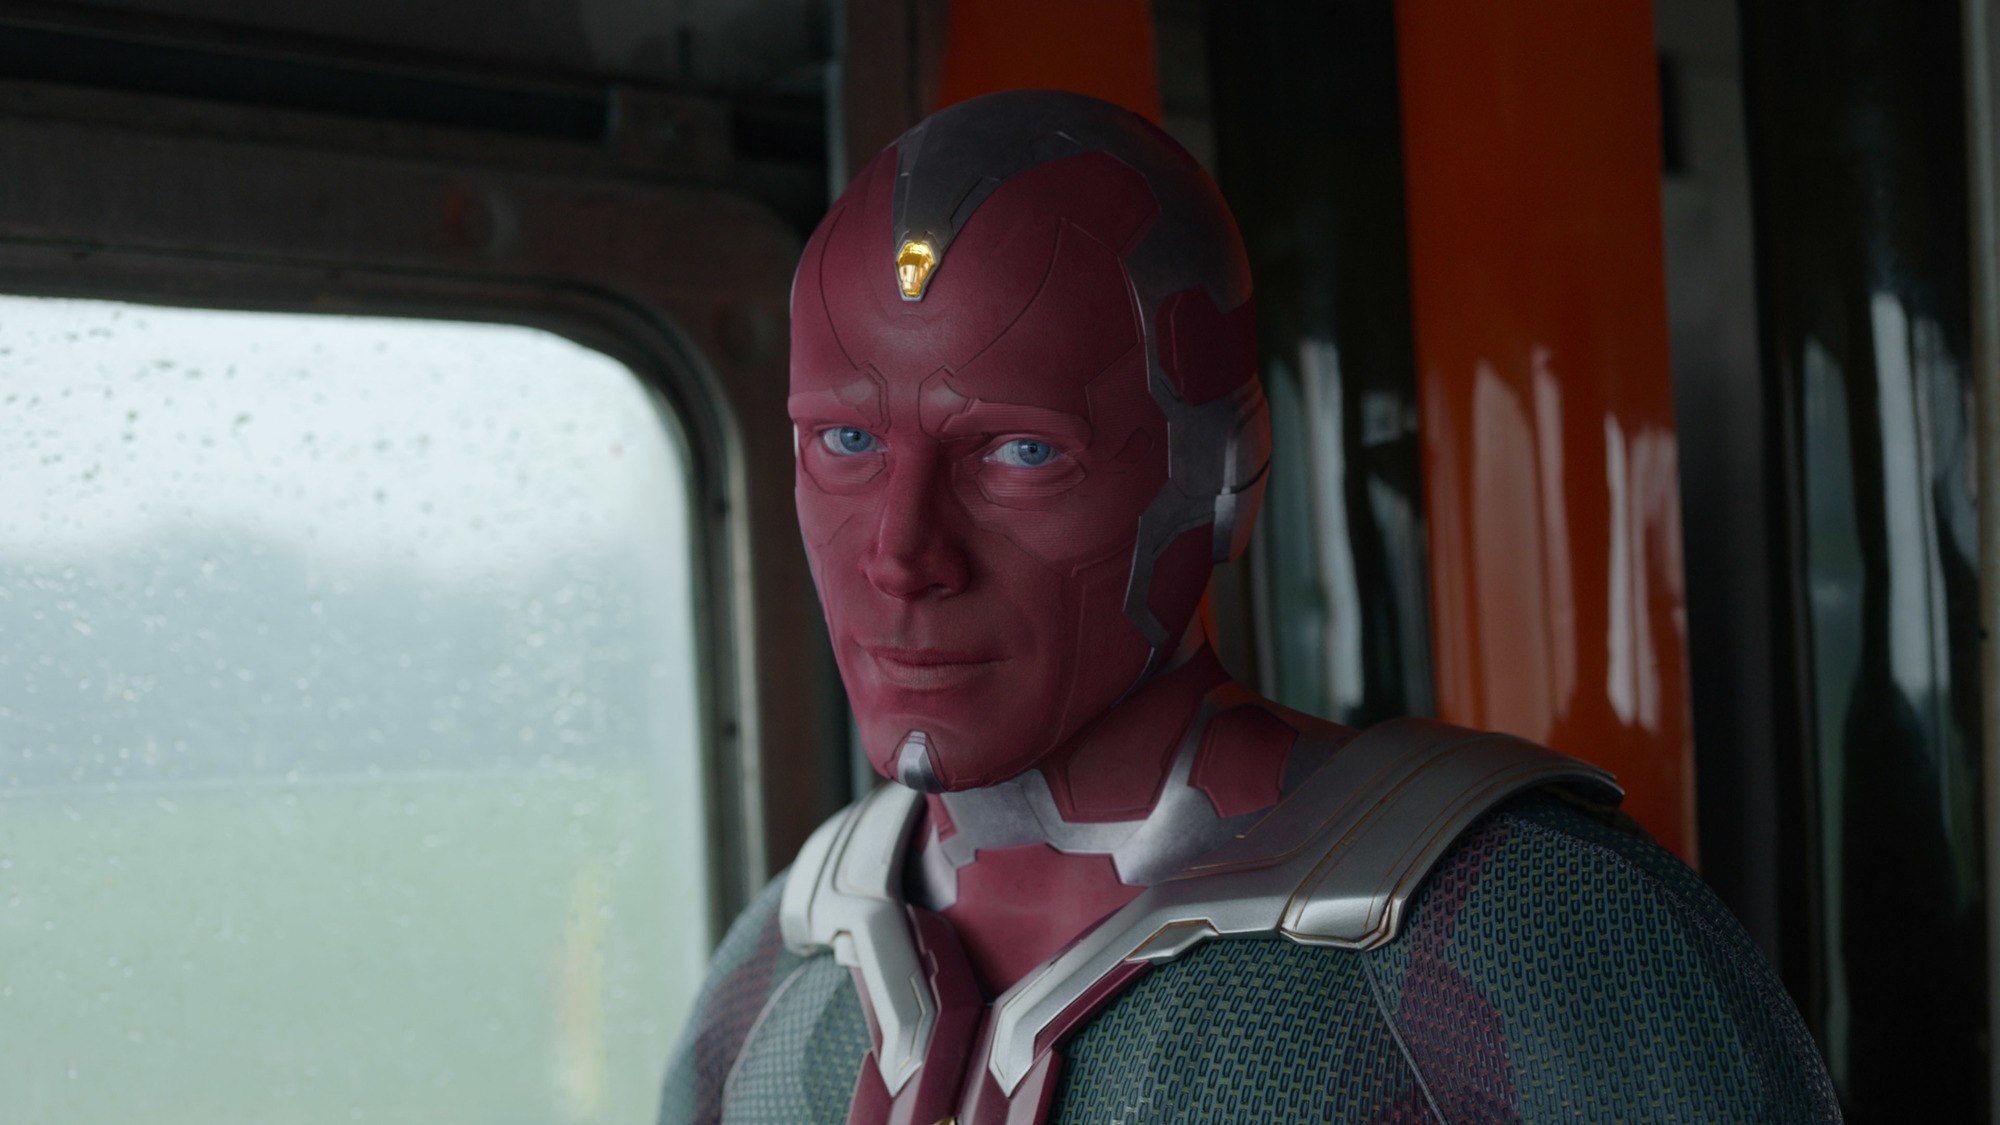 Paul Bettany as Vision in 'WandaVision.' He's looking directly at the camera, and he looks bemused. Could he take home an Emmy Award for his performance?